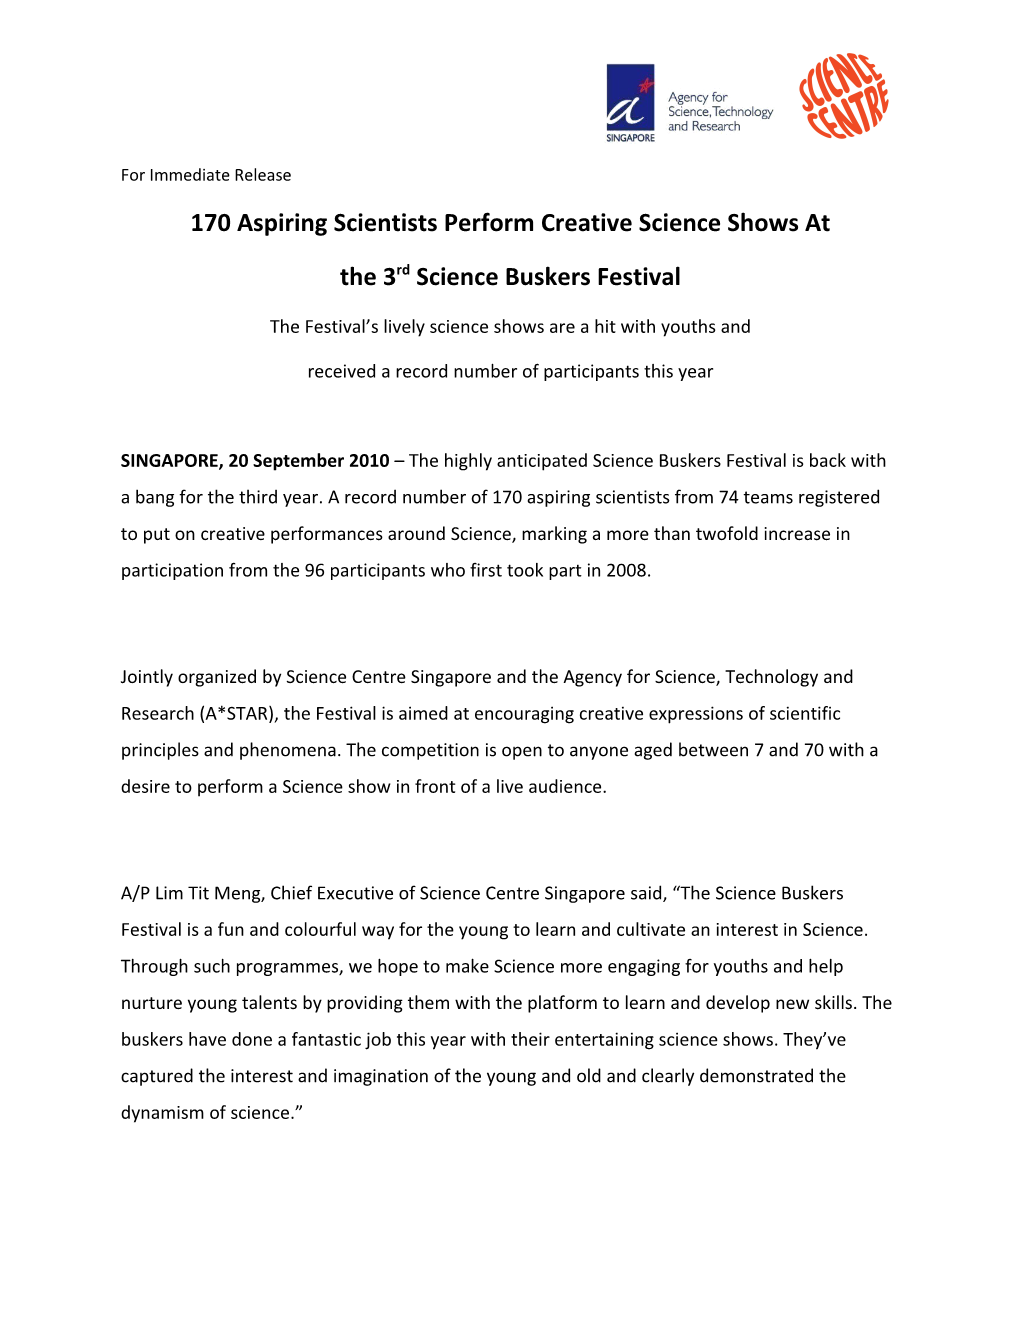 170 Aspiringscientists Perform Creative Science Shows At